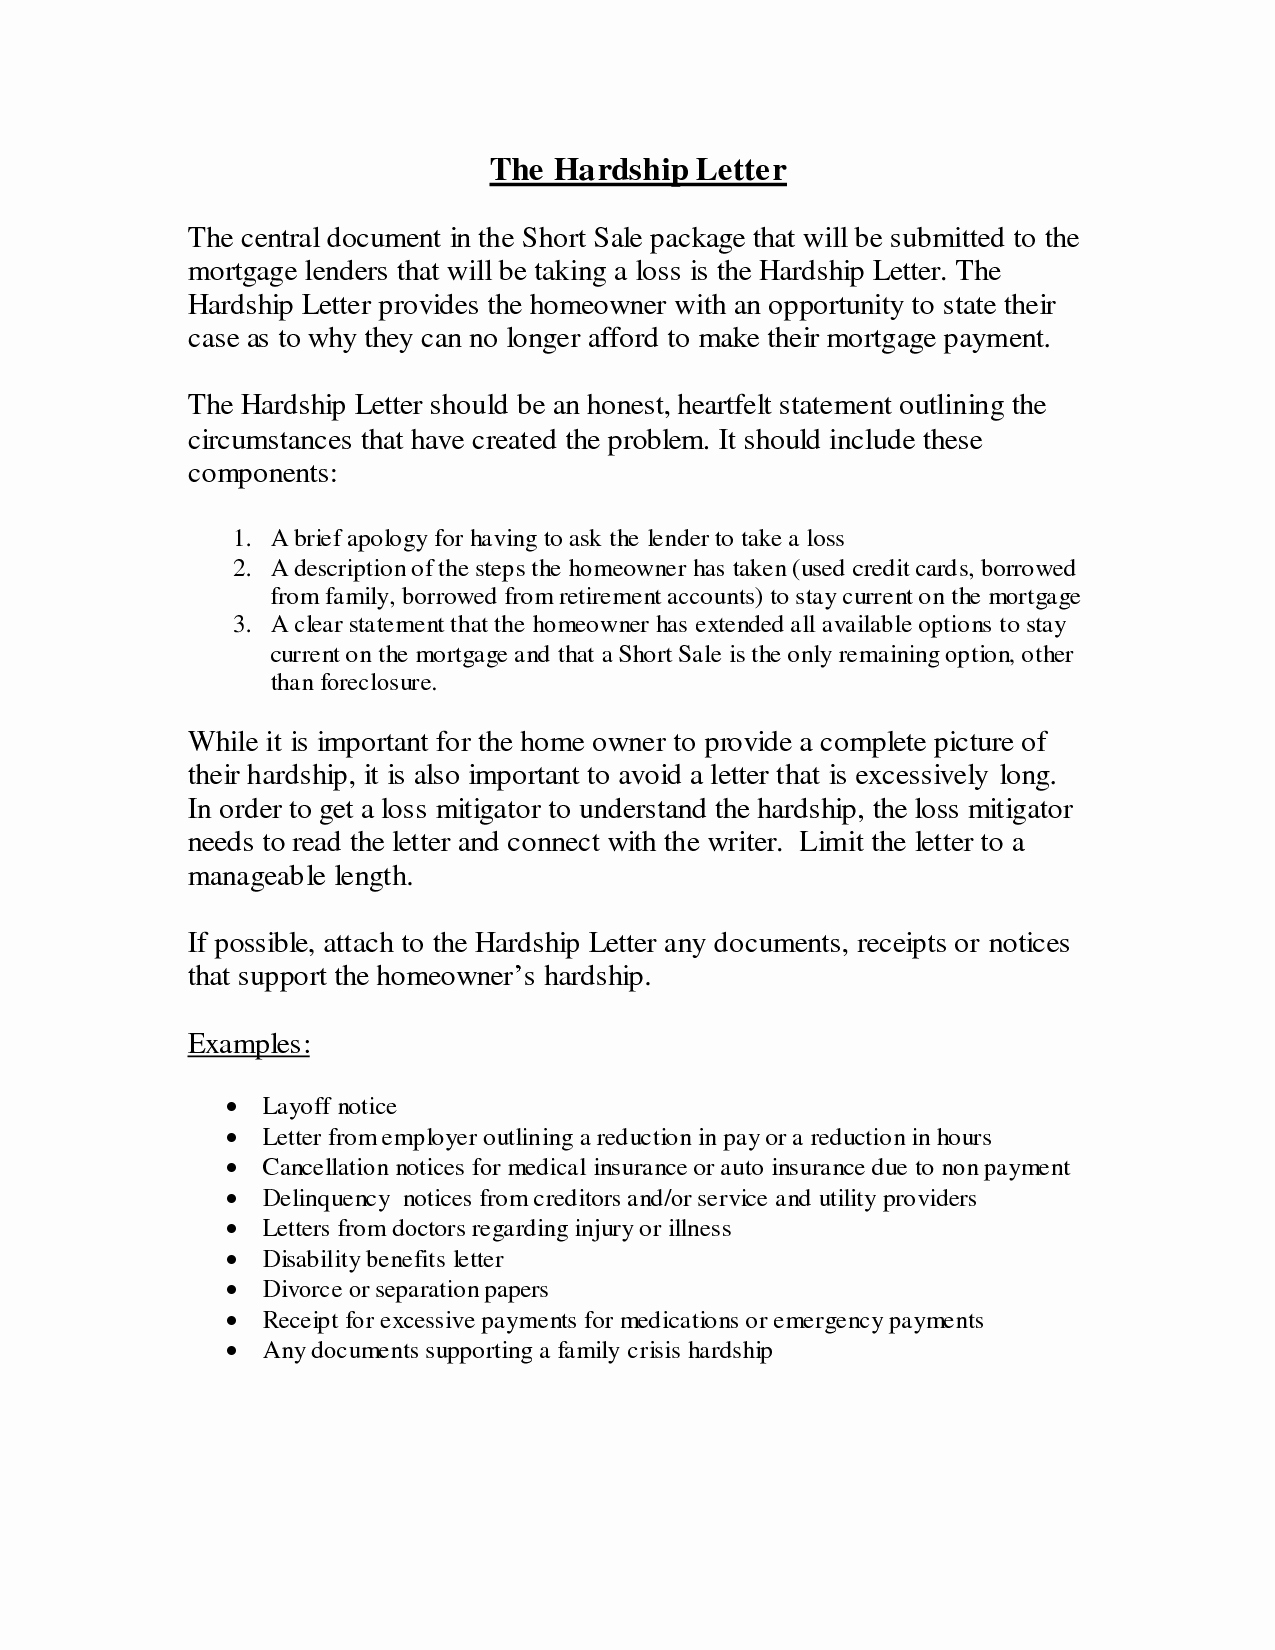 Mortgage Hardship Letter Template - How to Write A Hardship Letter for Immigration for A Friend Unique